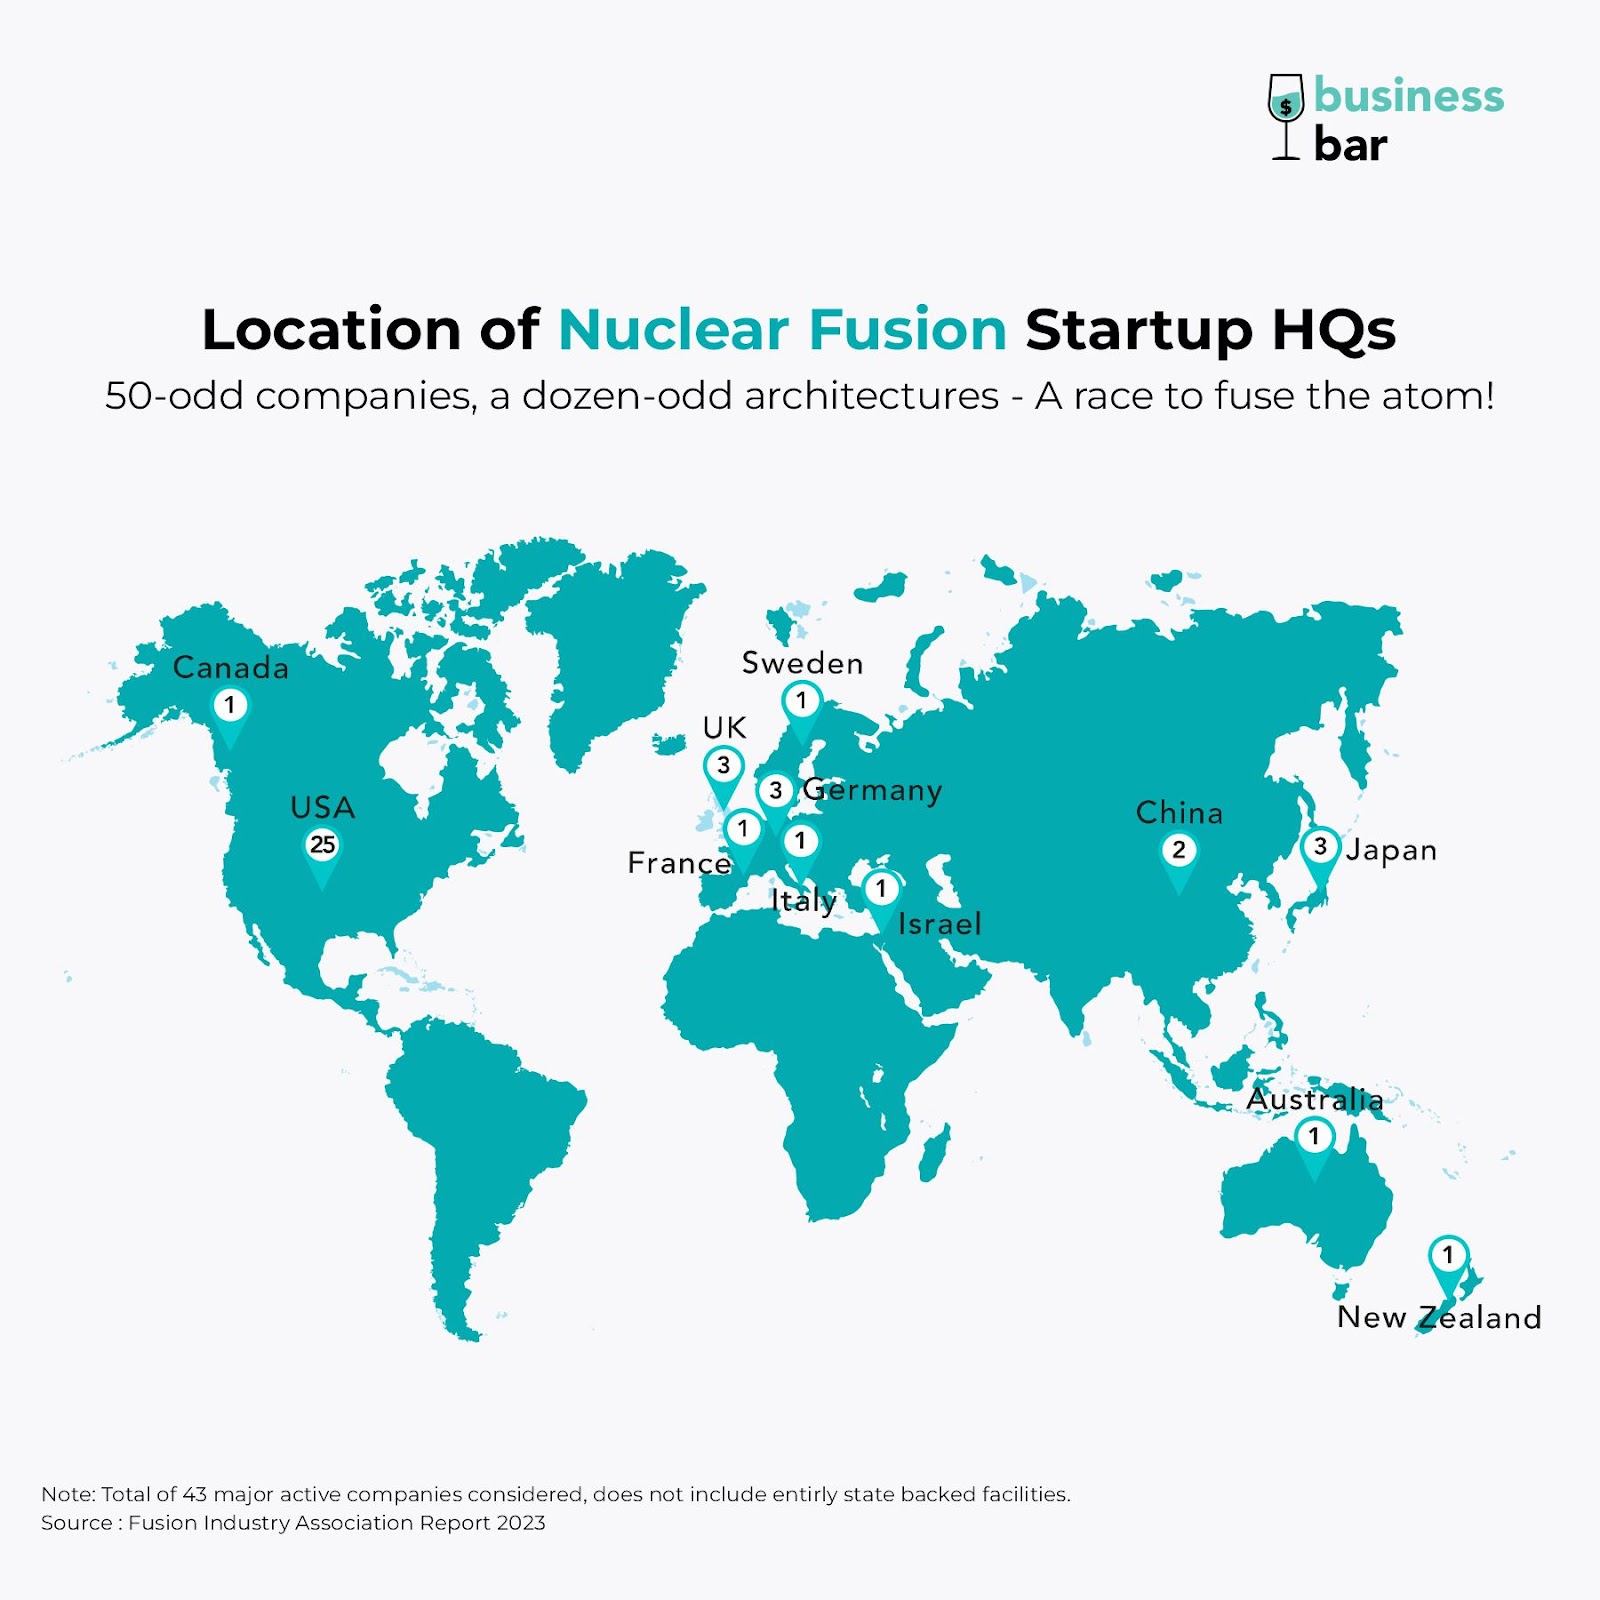 Nuclear Fusion Startups around the world